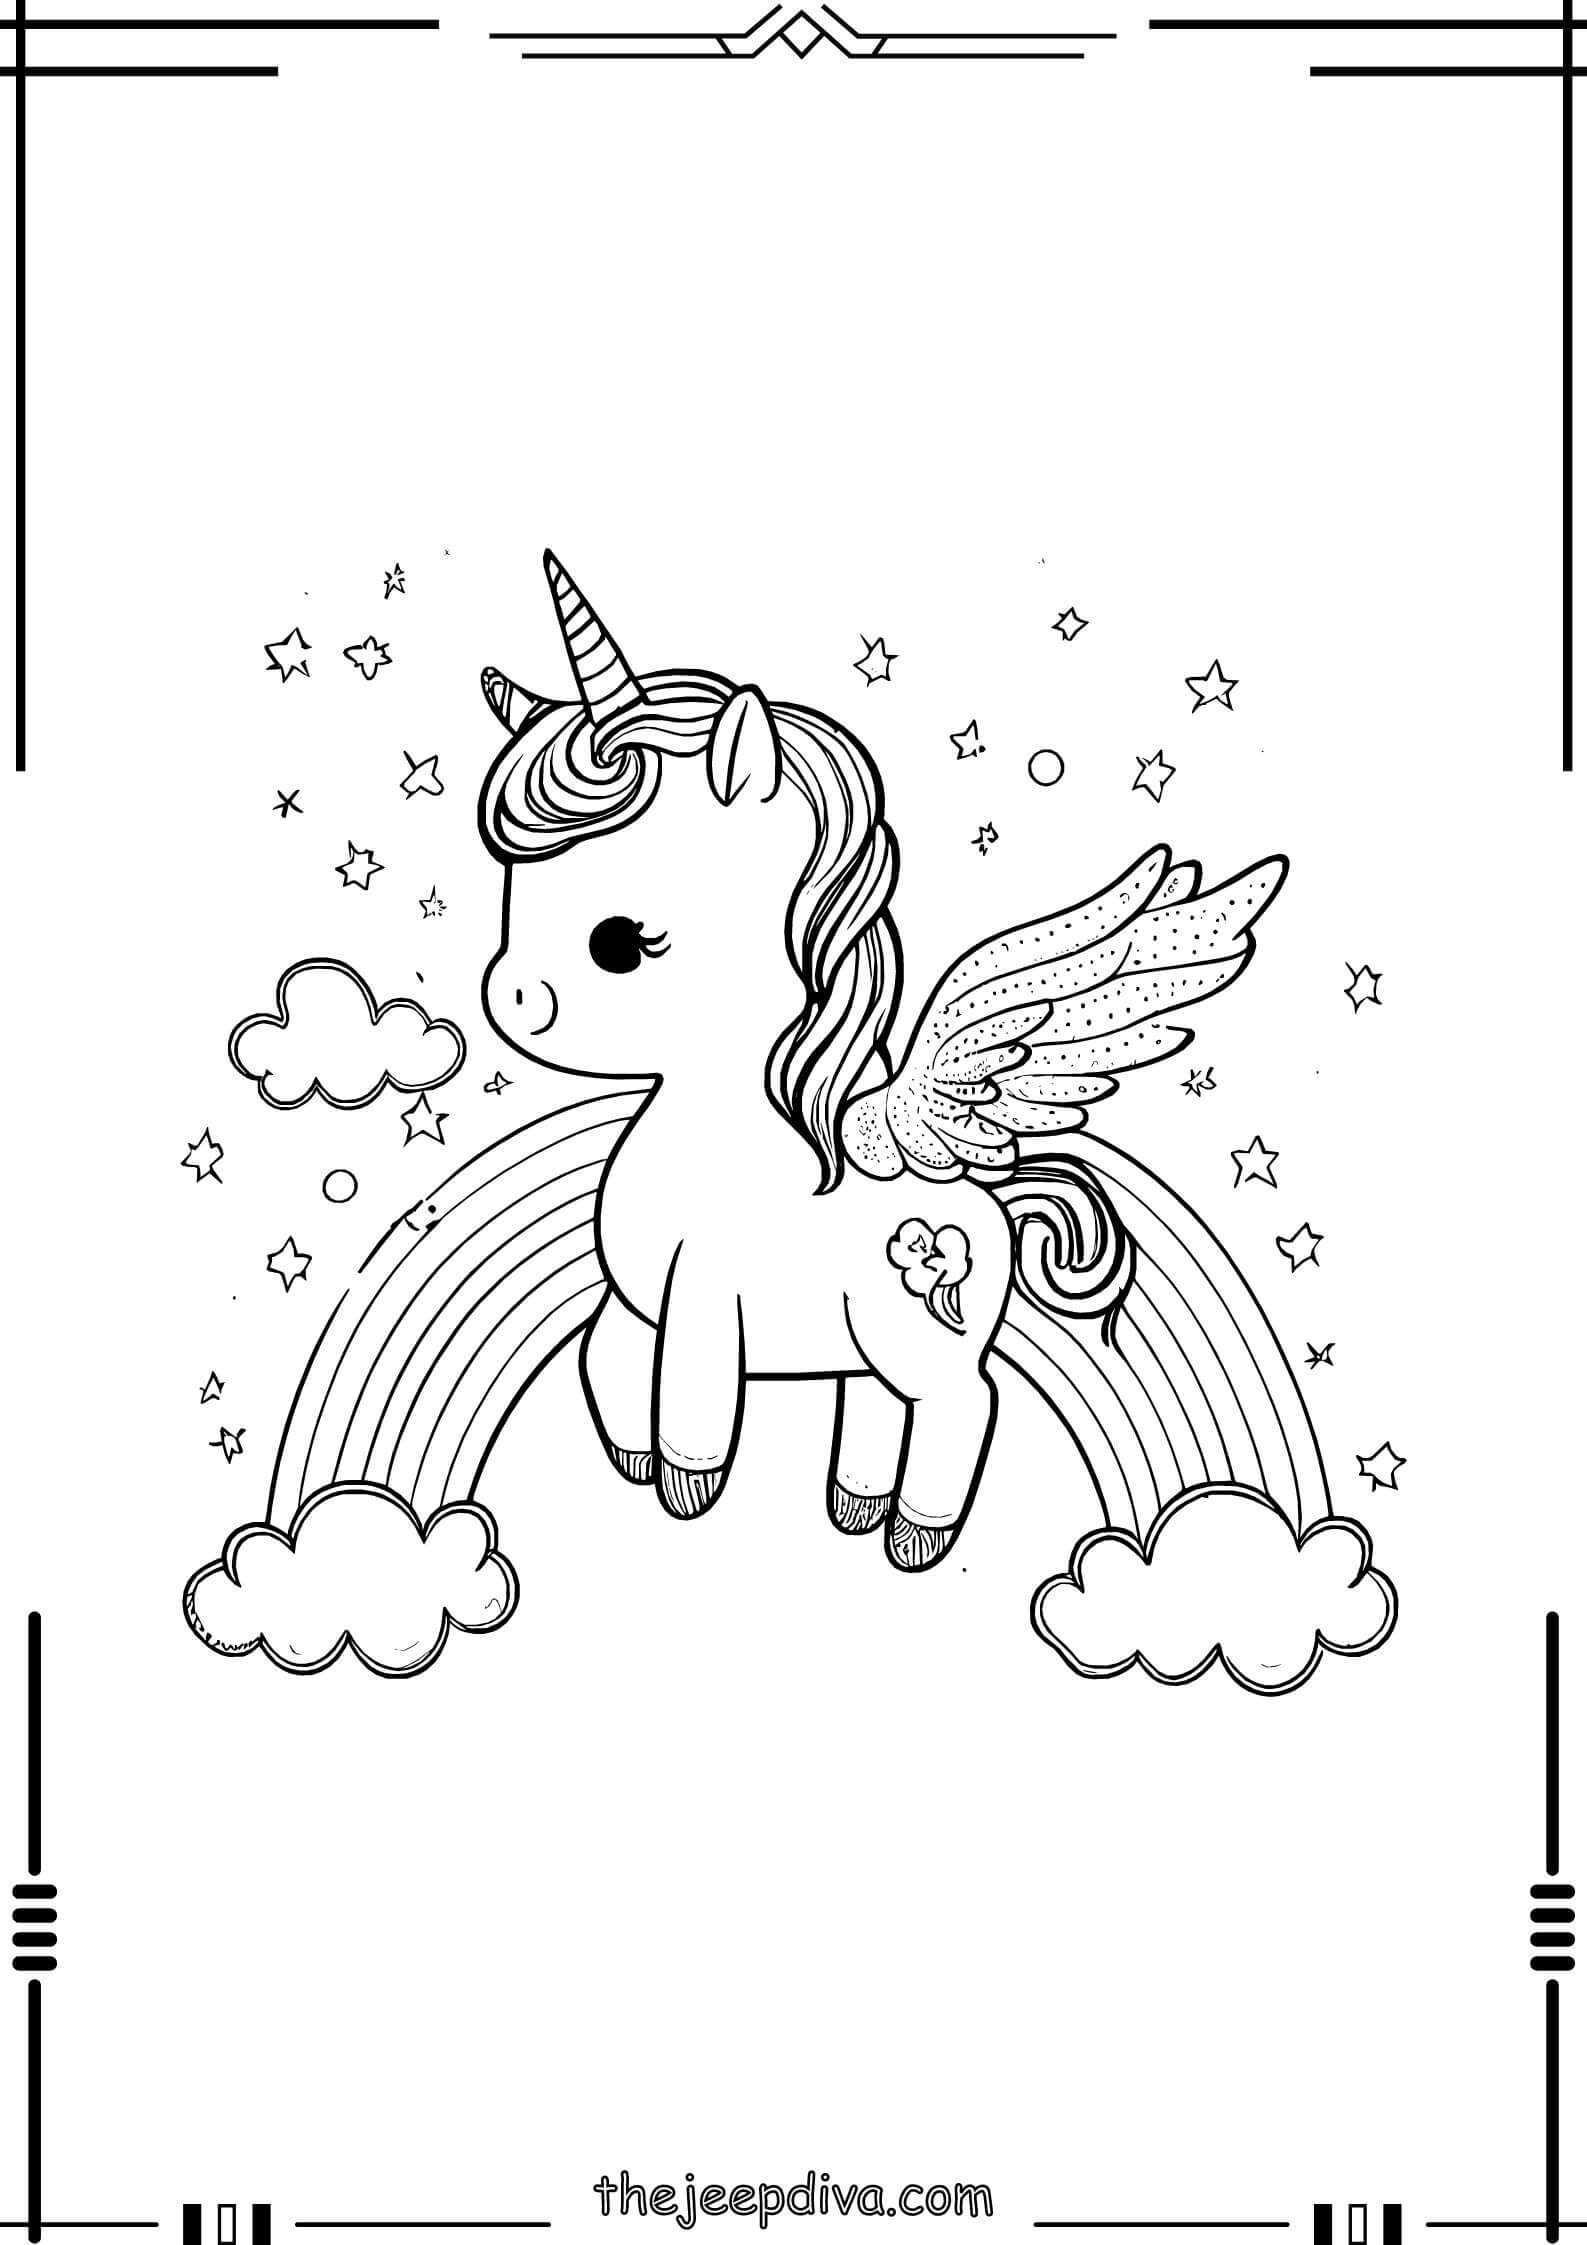 unicorn-coloring-page-easy-13